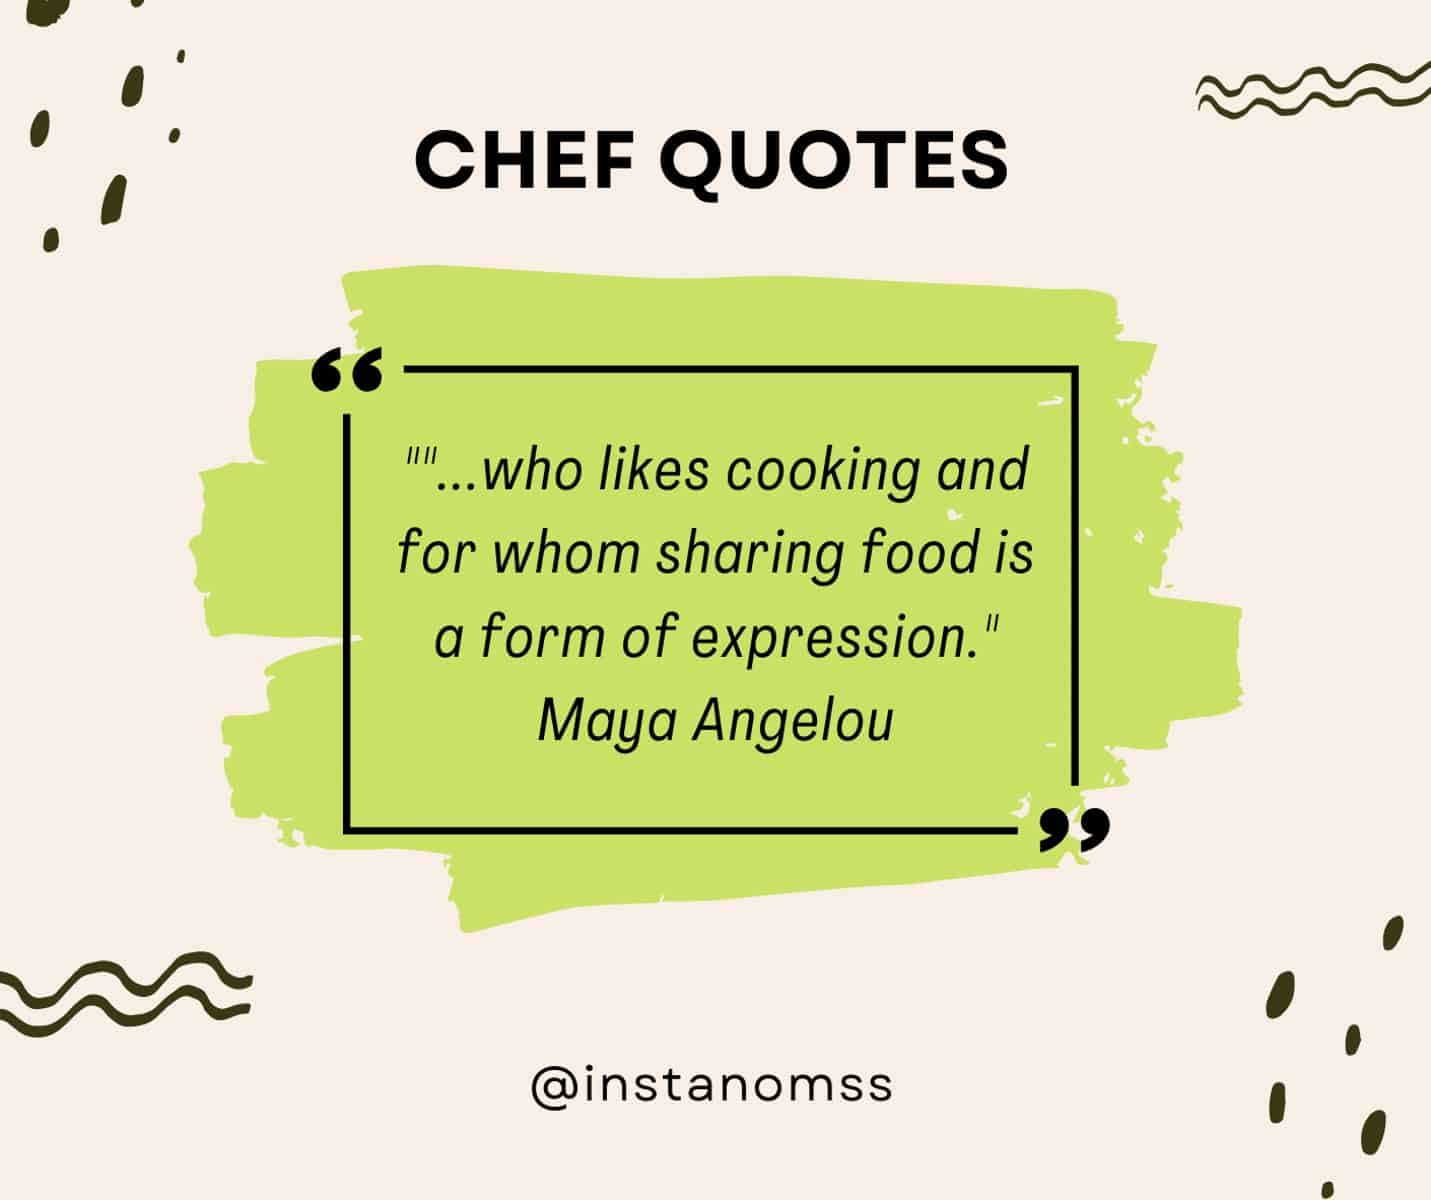 "...who likes cooking and for whom sharing food is a form of expression." Maya Angelou